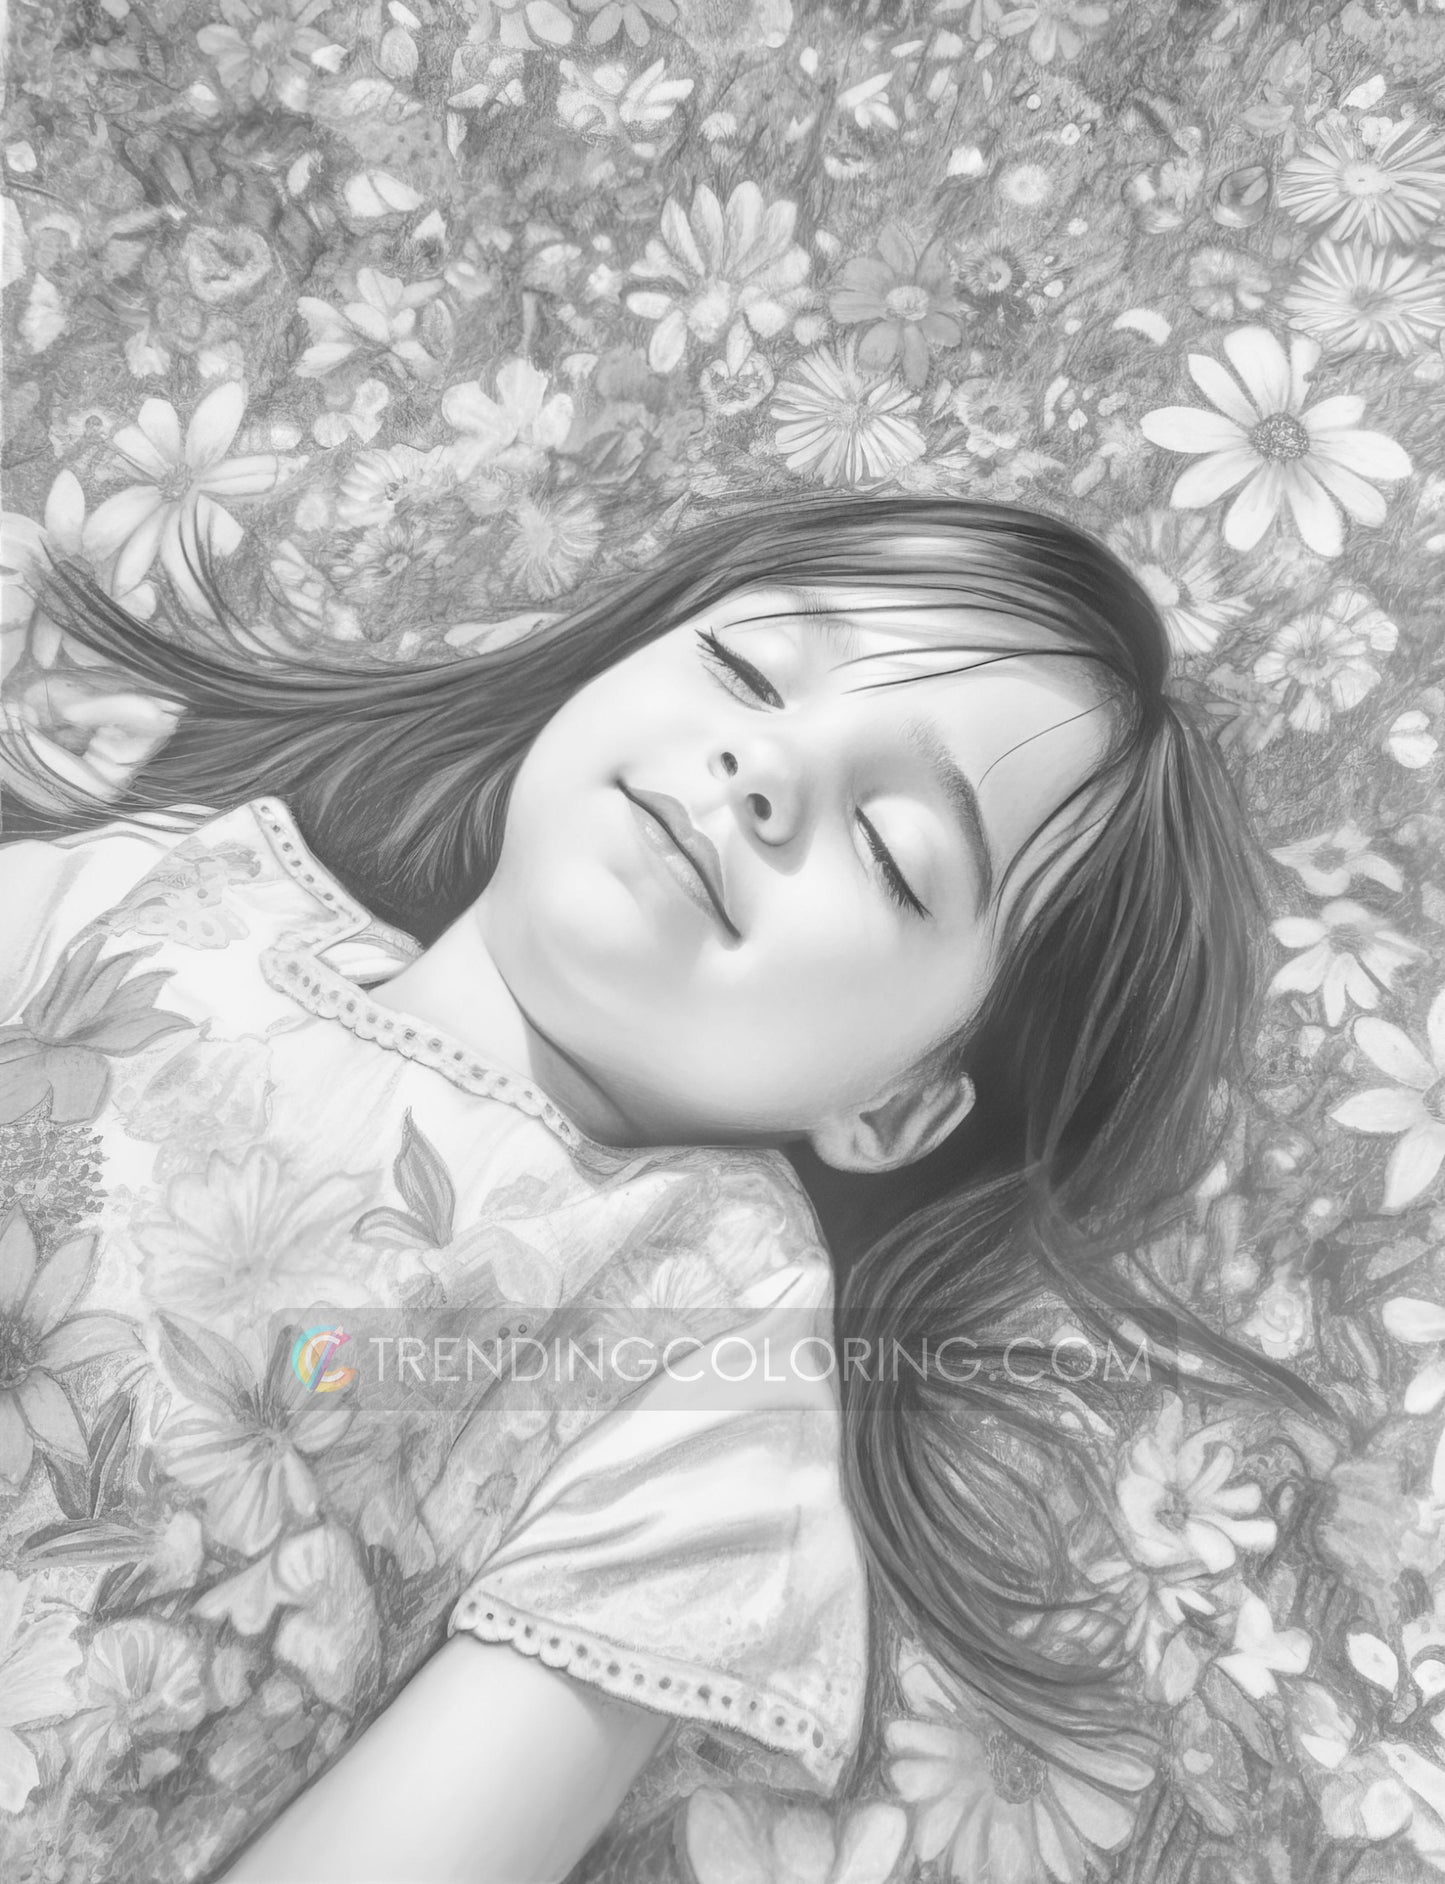 25 Little Girl In Garden Grayscale Coloring Pages - Instant Download - Printable Dark/Light